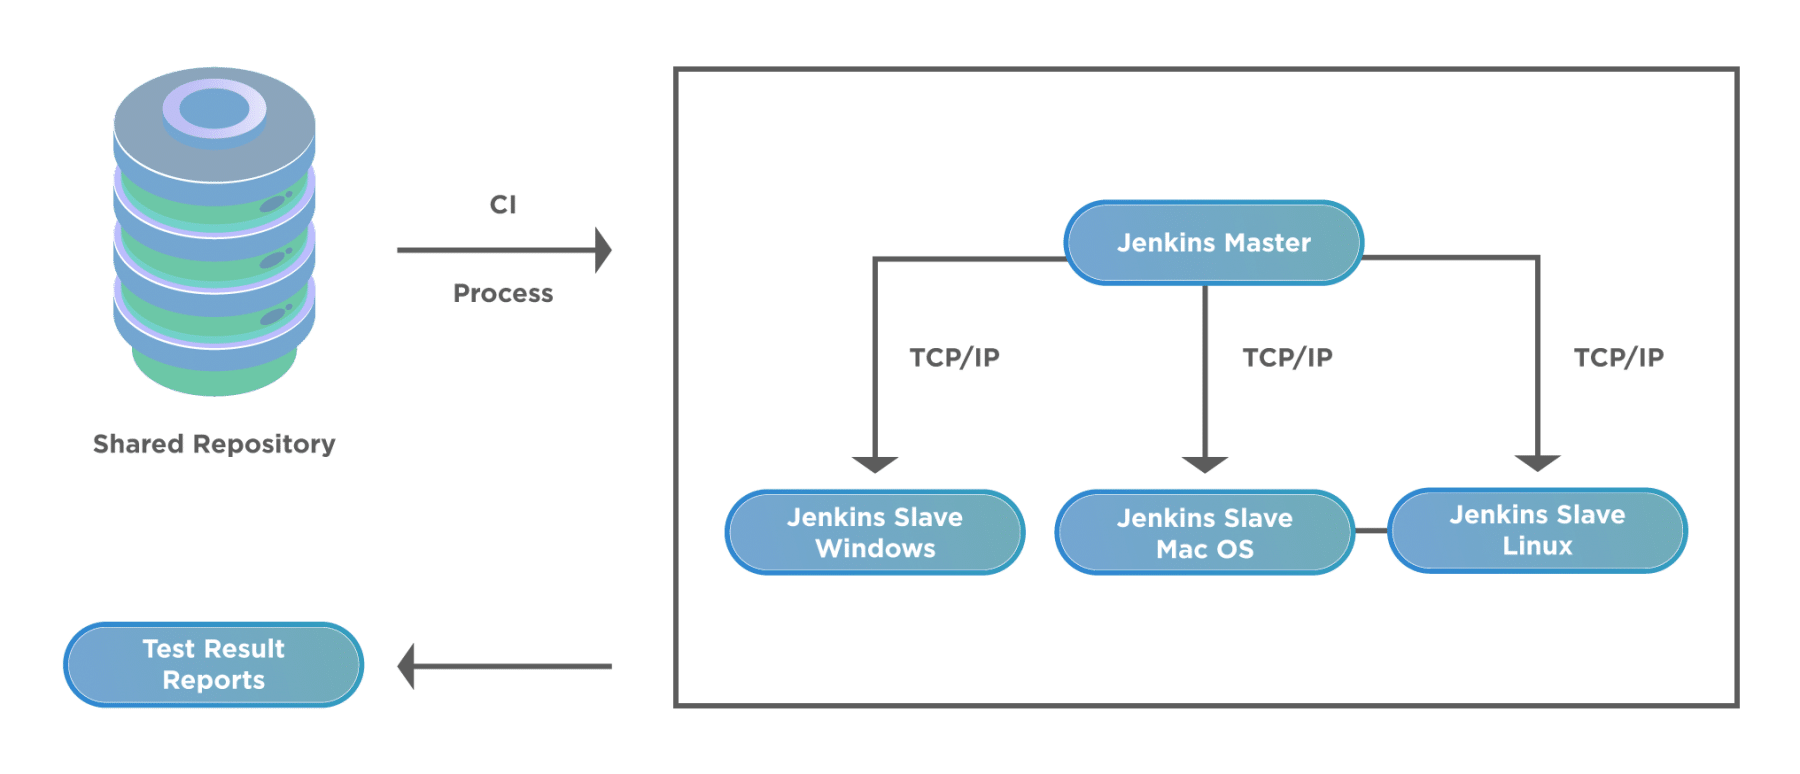 Jenkins Distributed Architecture